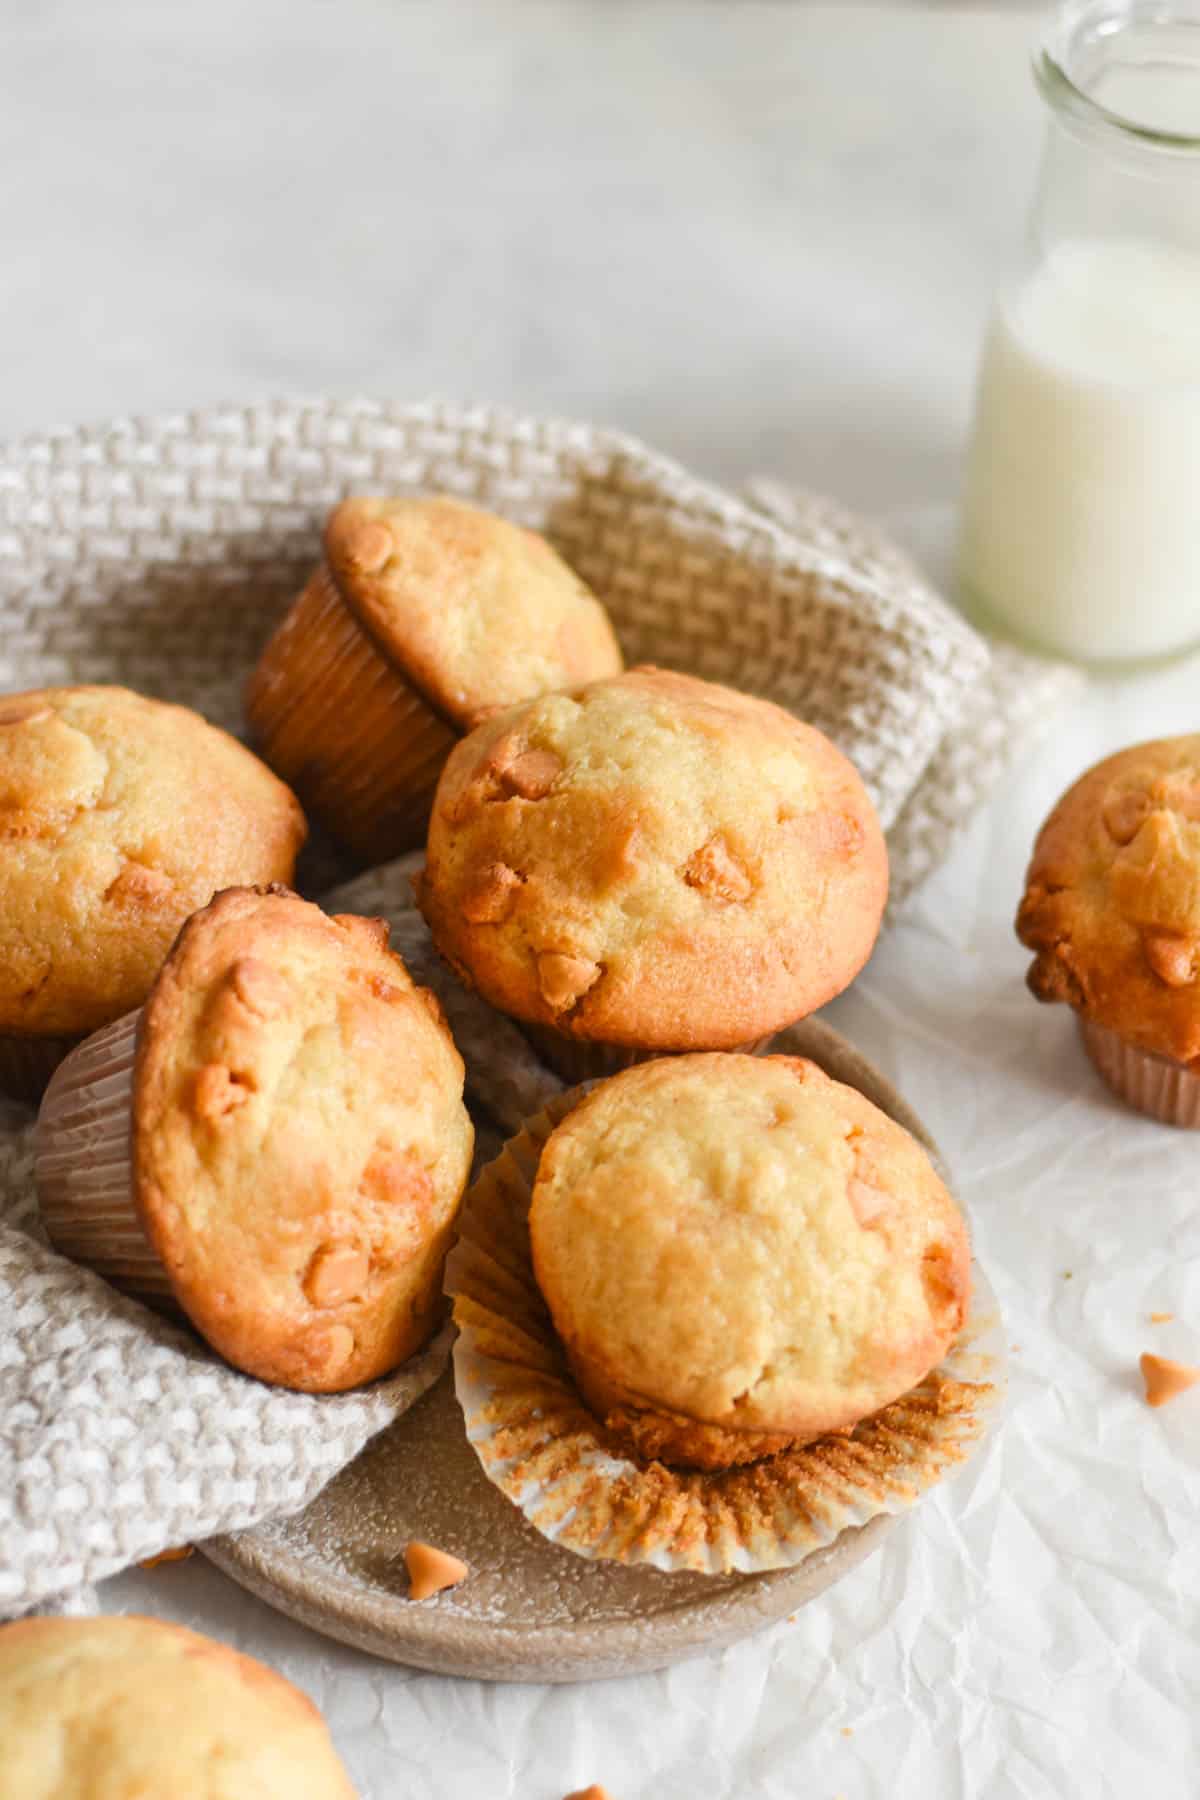 muffins piled together in a dish towel. 